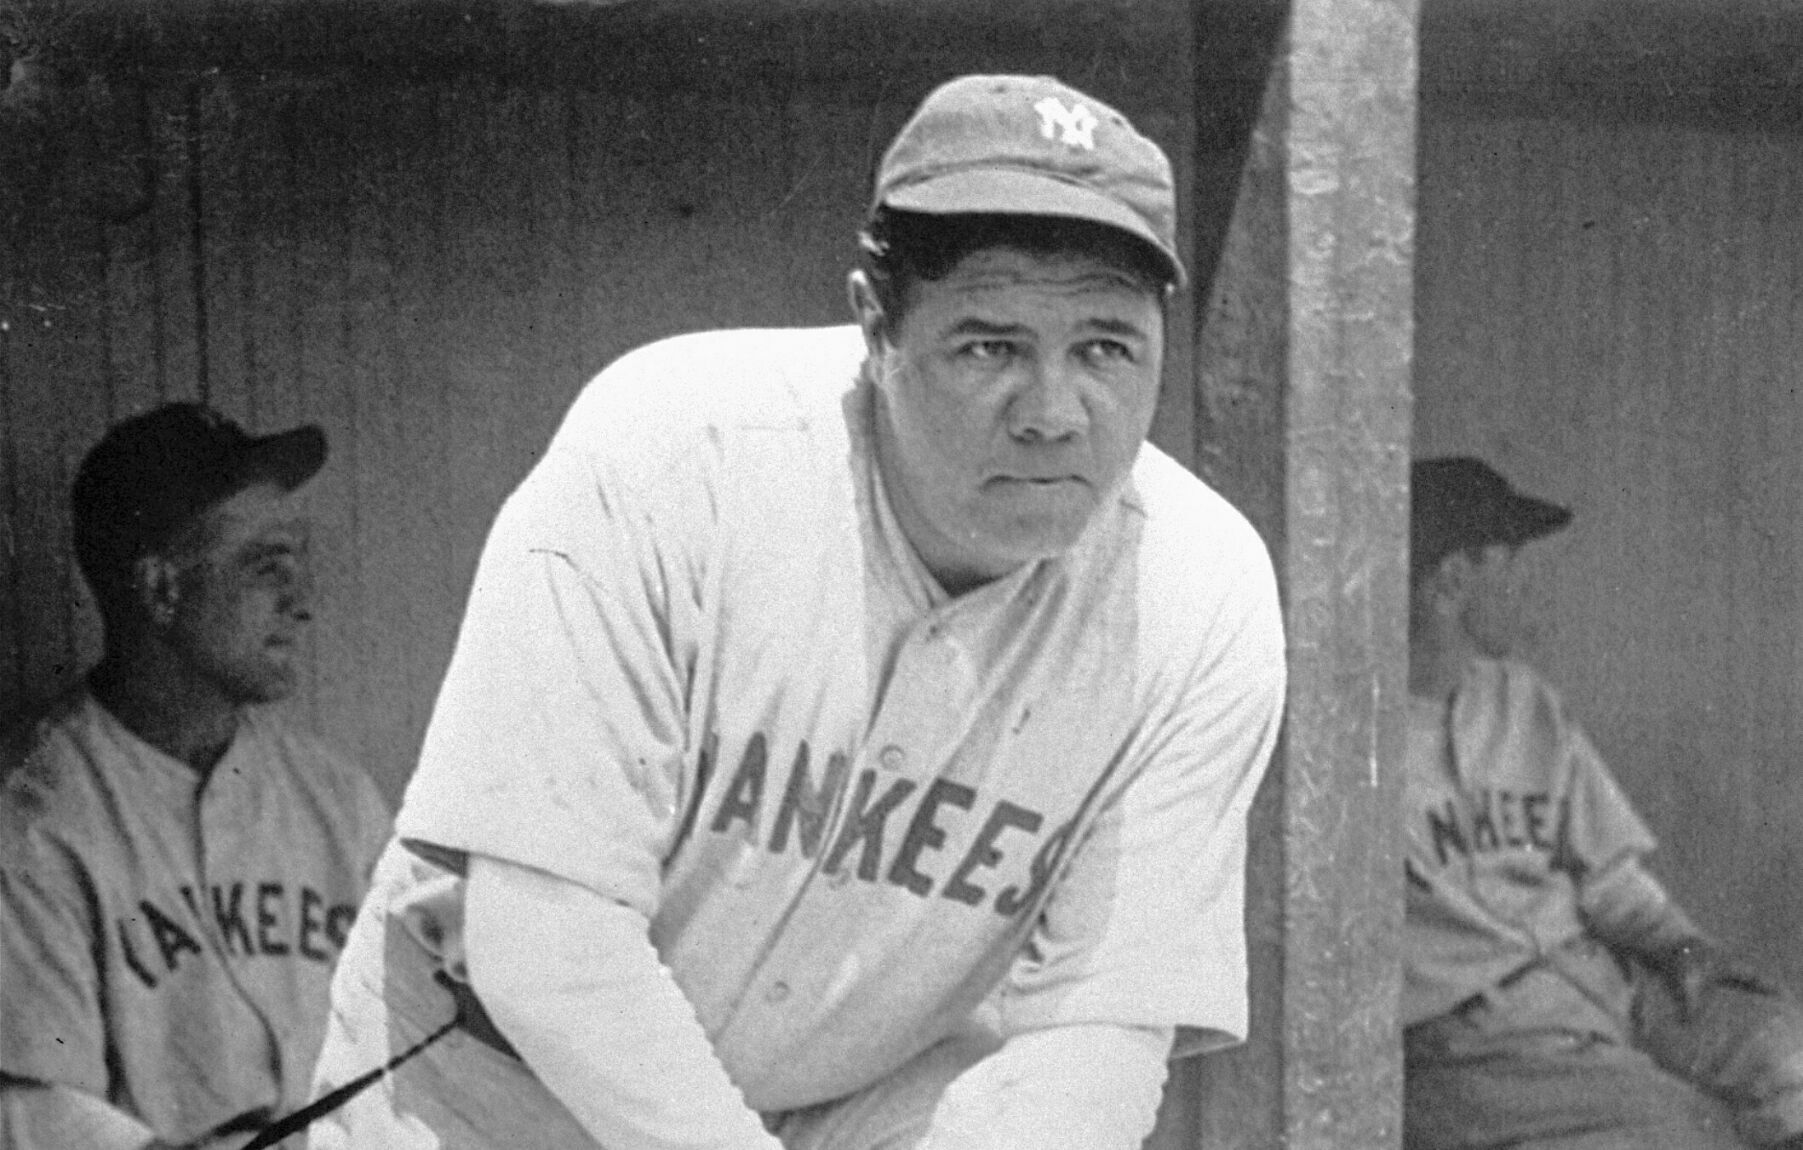 Famous Babe Ruth Photograph Large Restored Reprint Vintage 